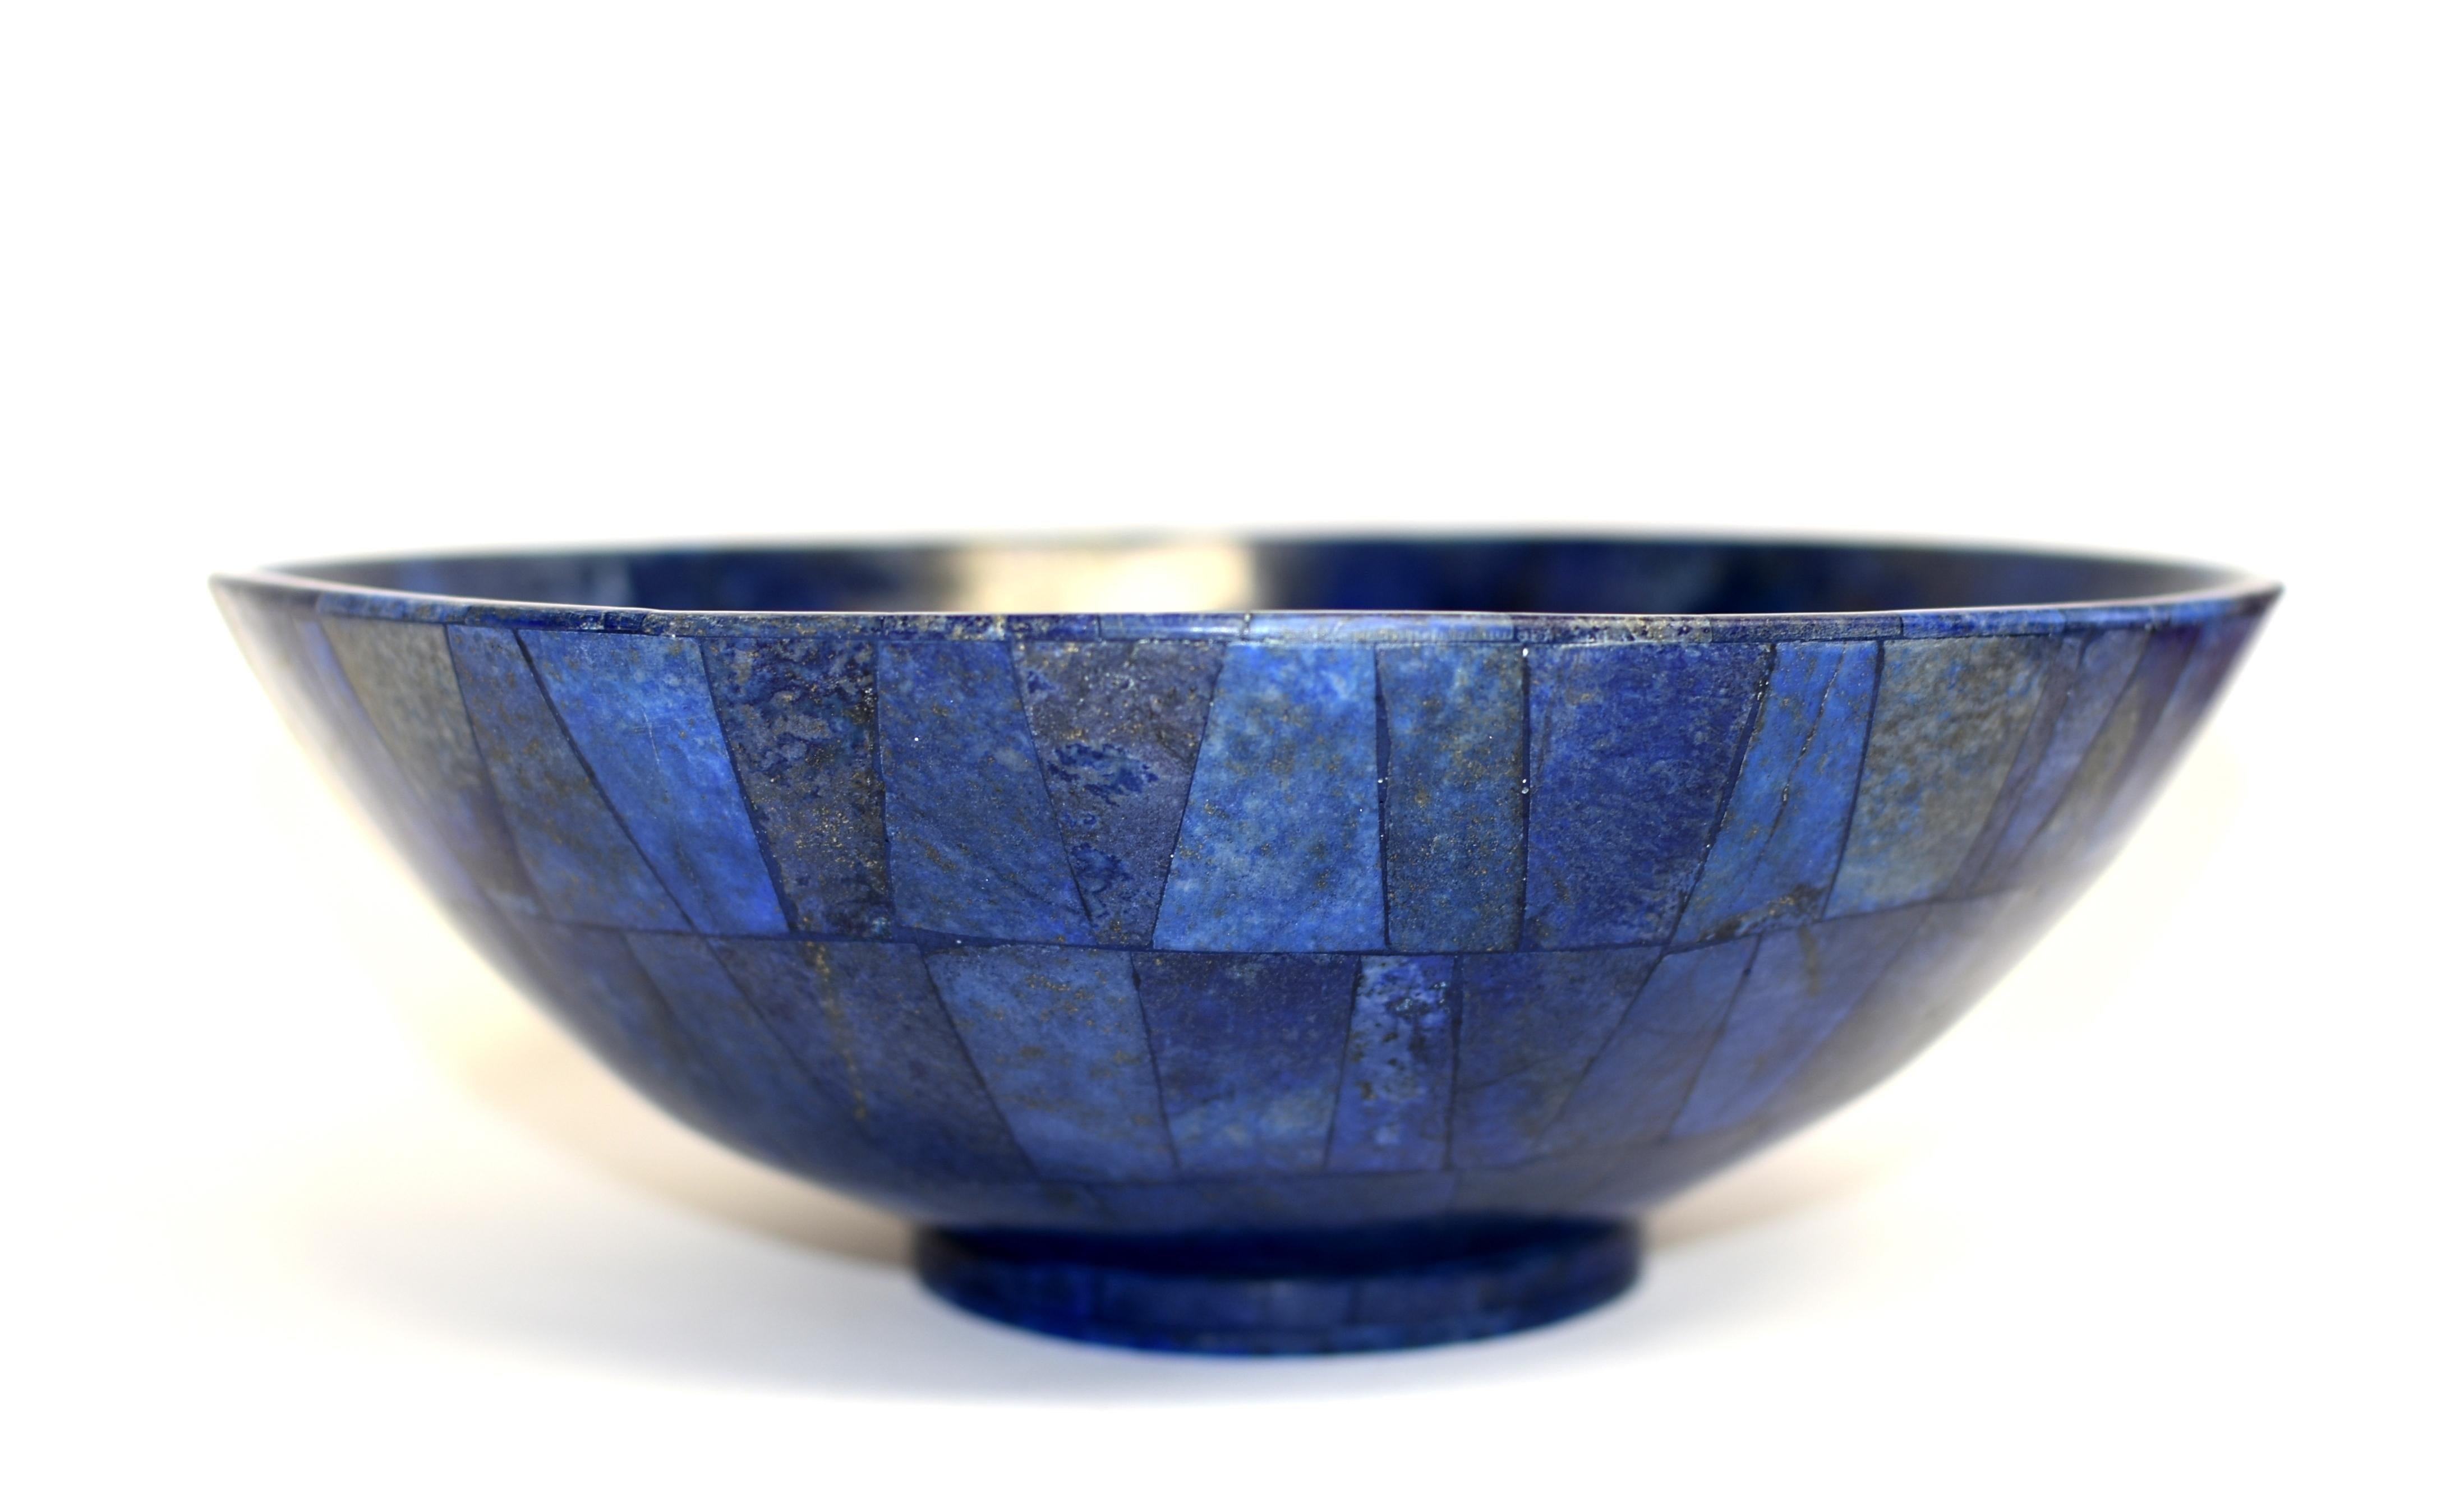 A most stunning giant lapis bowl nearly 12